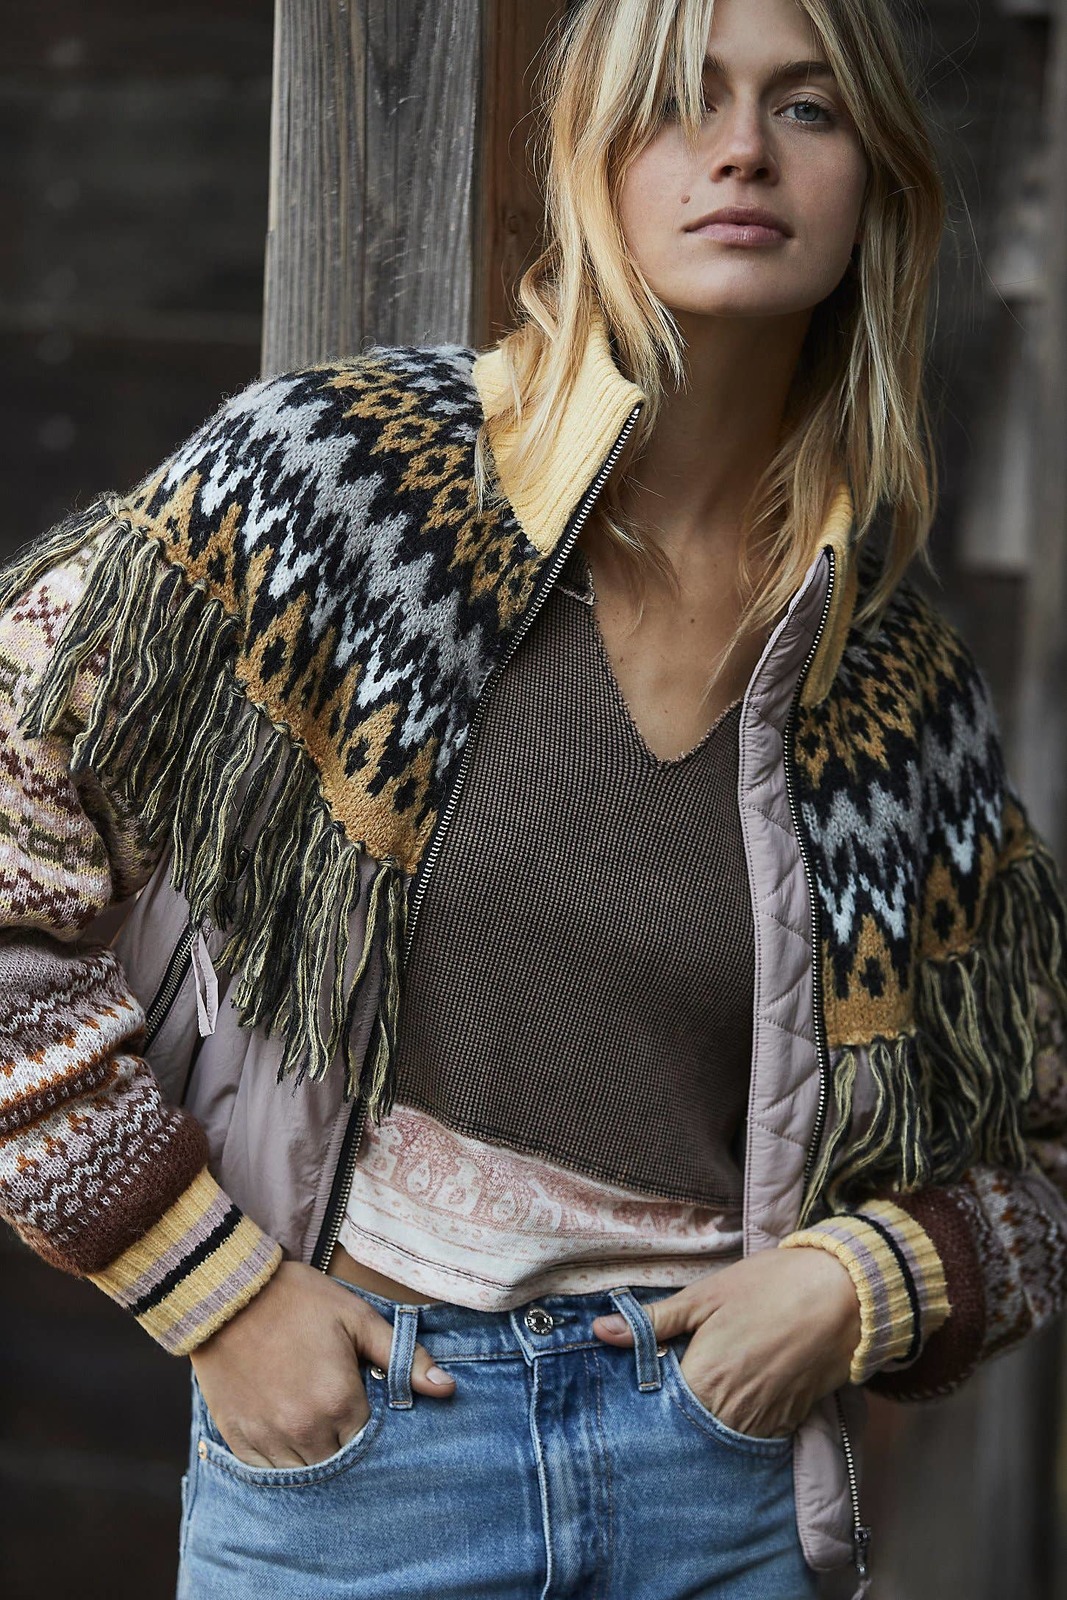 Primary image for New Free People Riley Swit Bomber Jacket $228 SMALL Lavender Knit Print Fringed